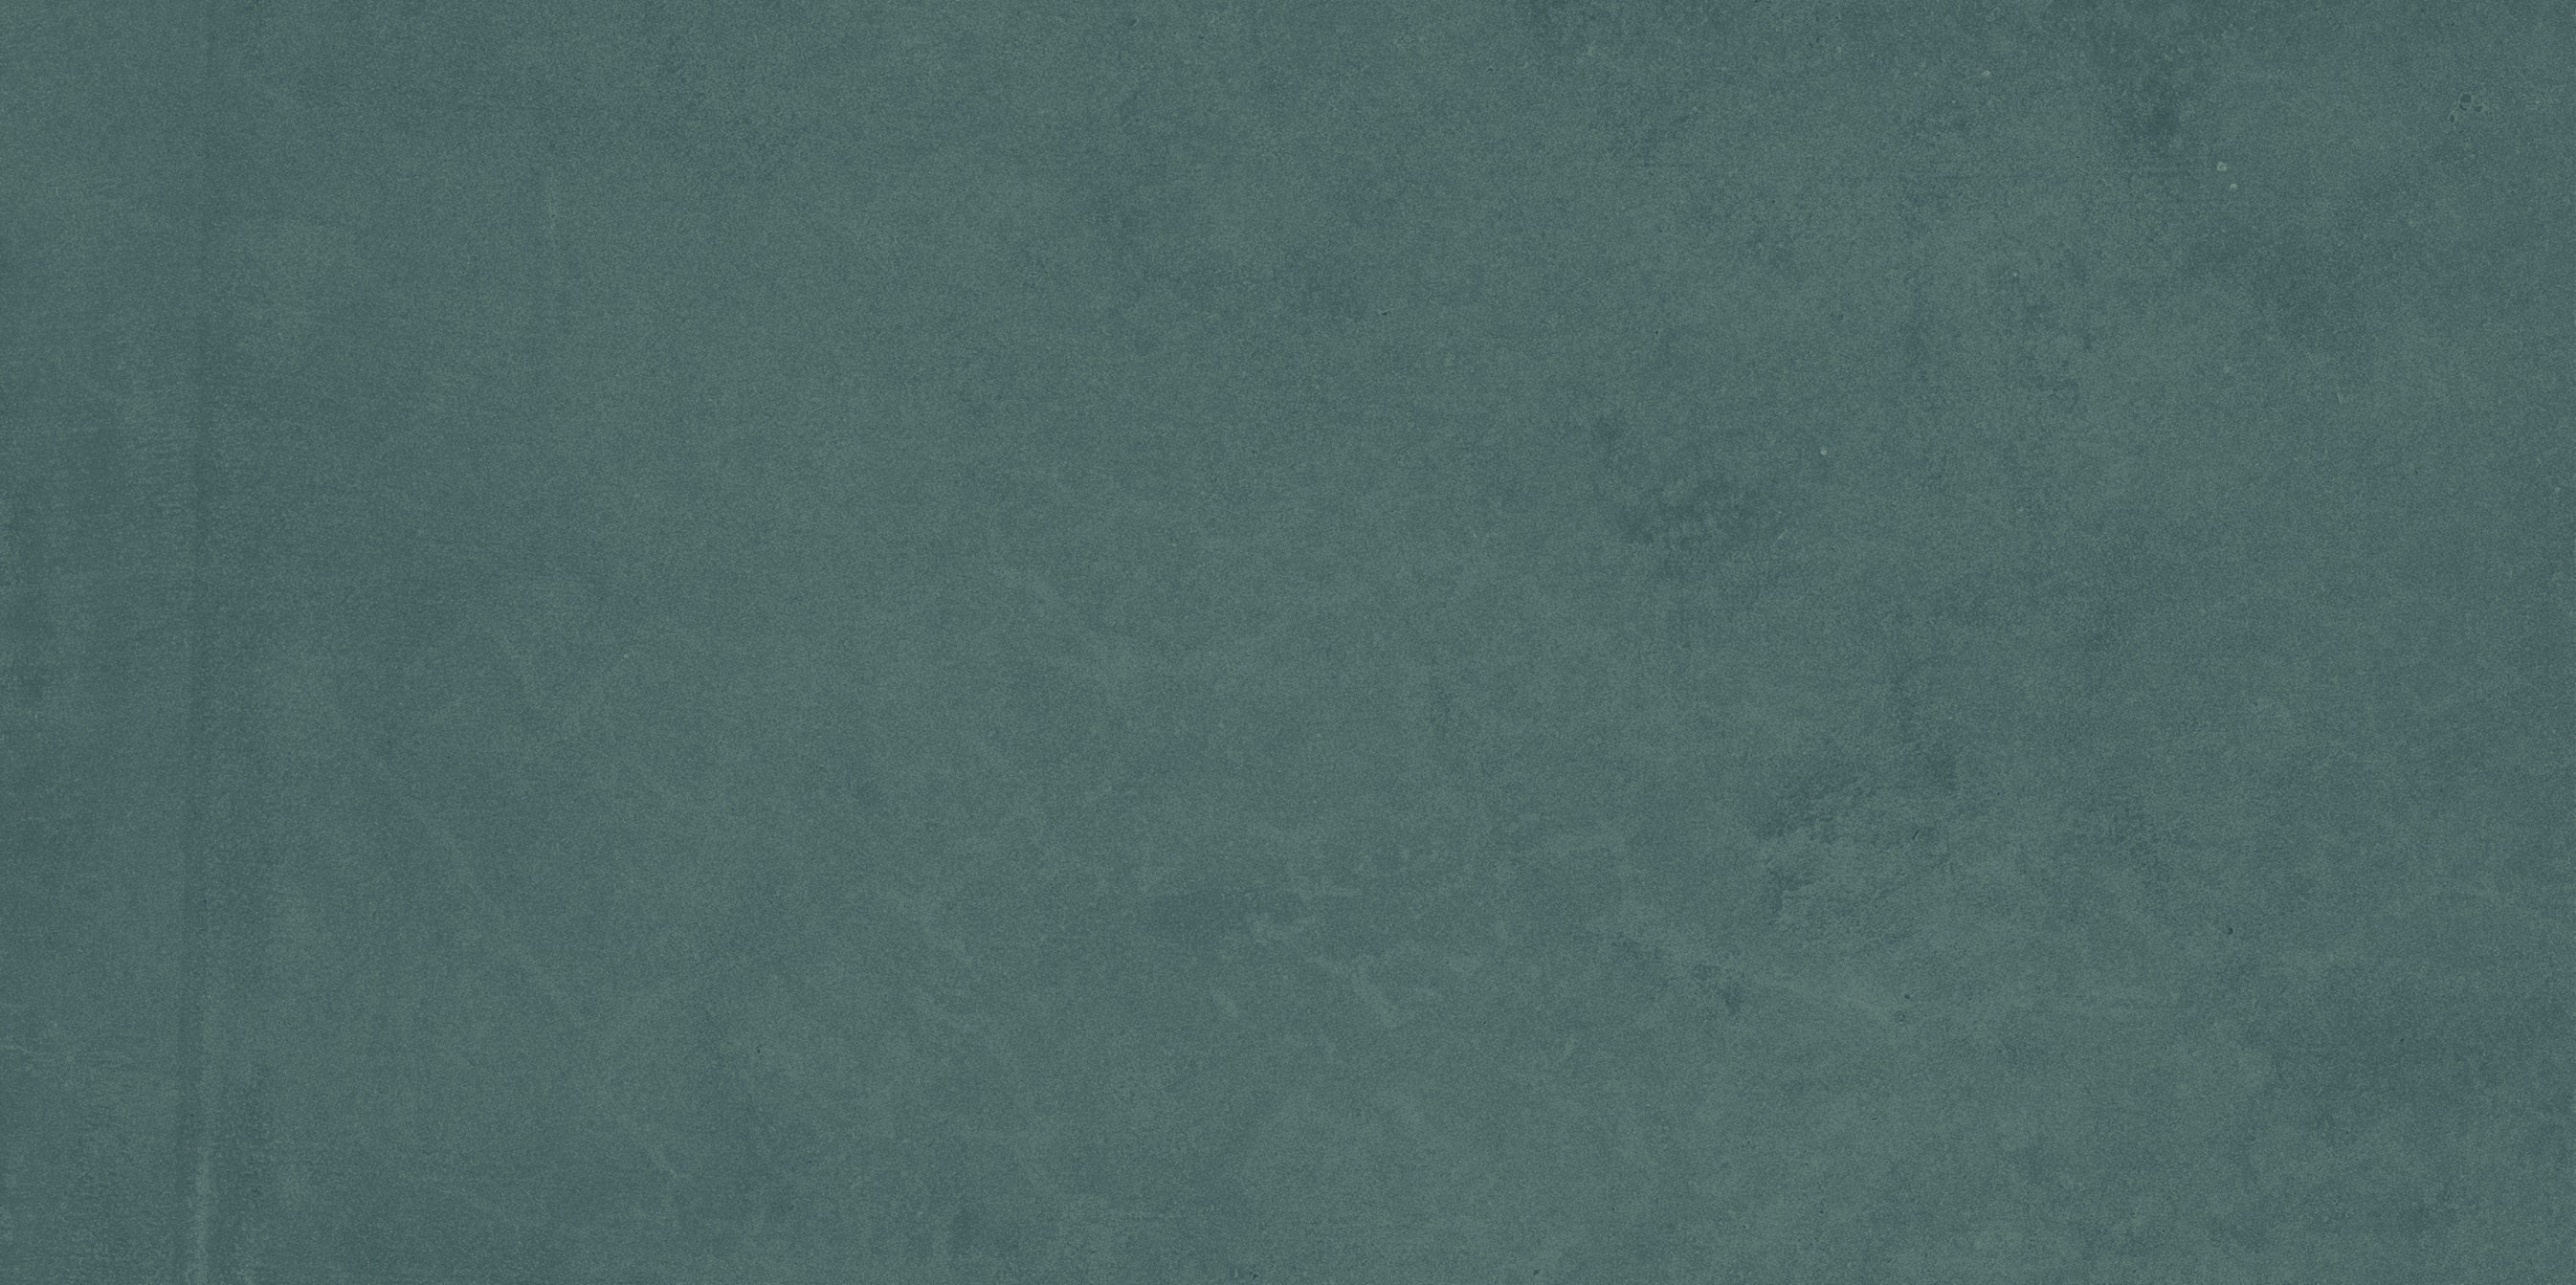 landmark 9mm vision color forest green field tile 12x24x9mm matte rectified porcelain tile distributed by surface group international